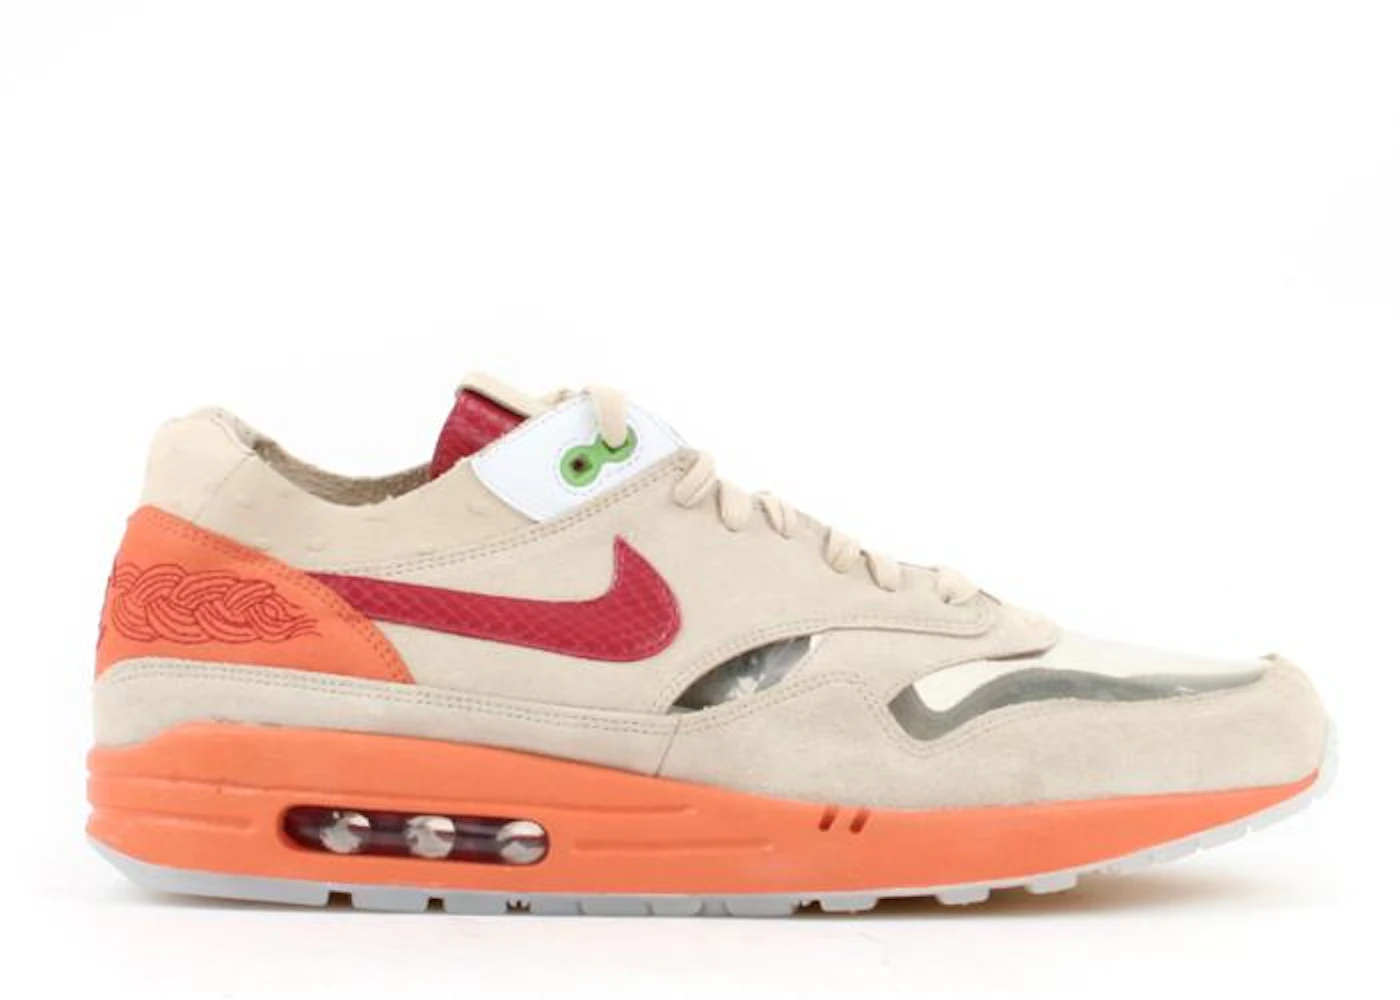 Nike's bringing back the Clot Air Max 1 sneaker made only for